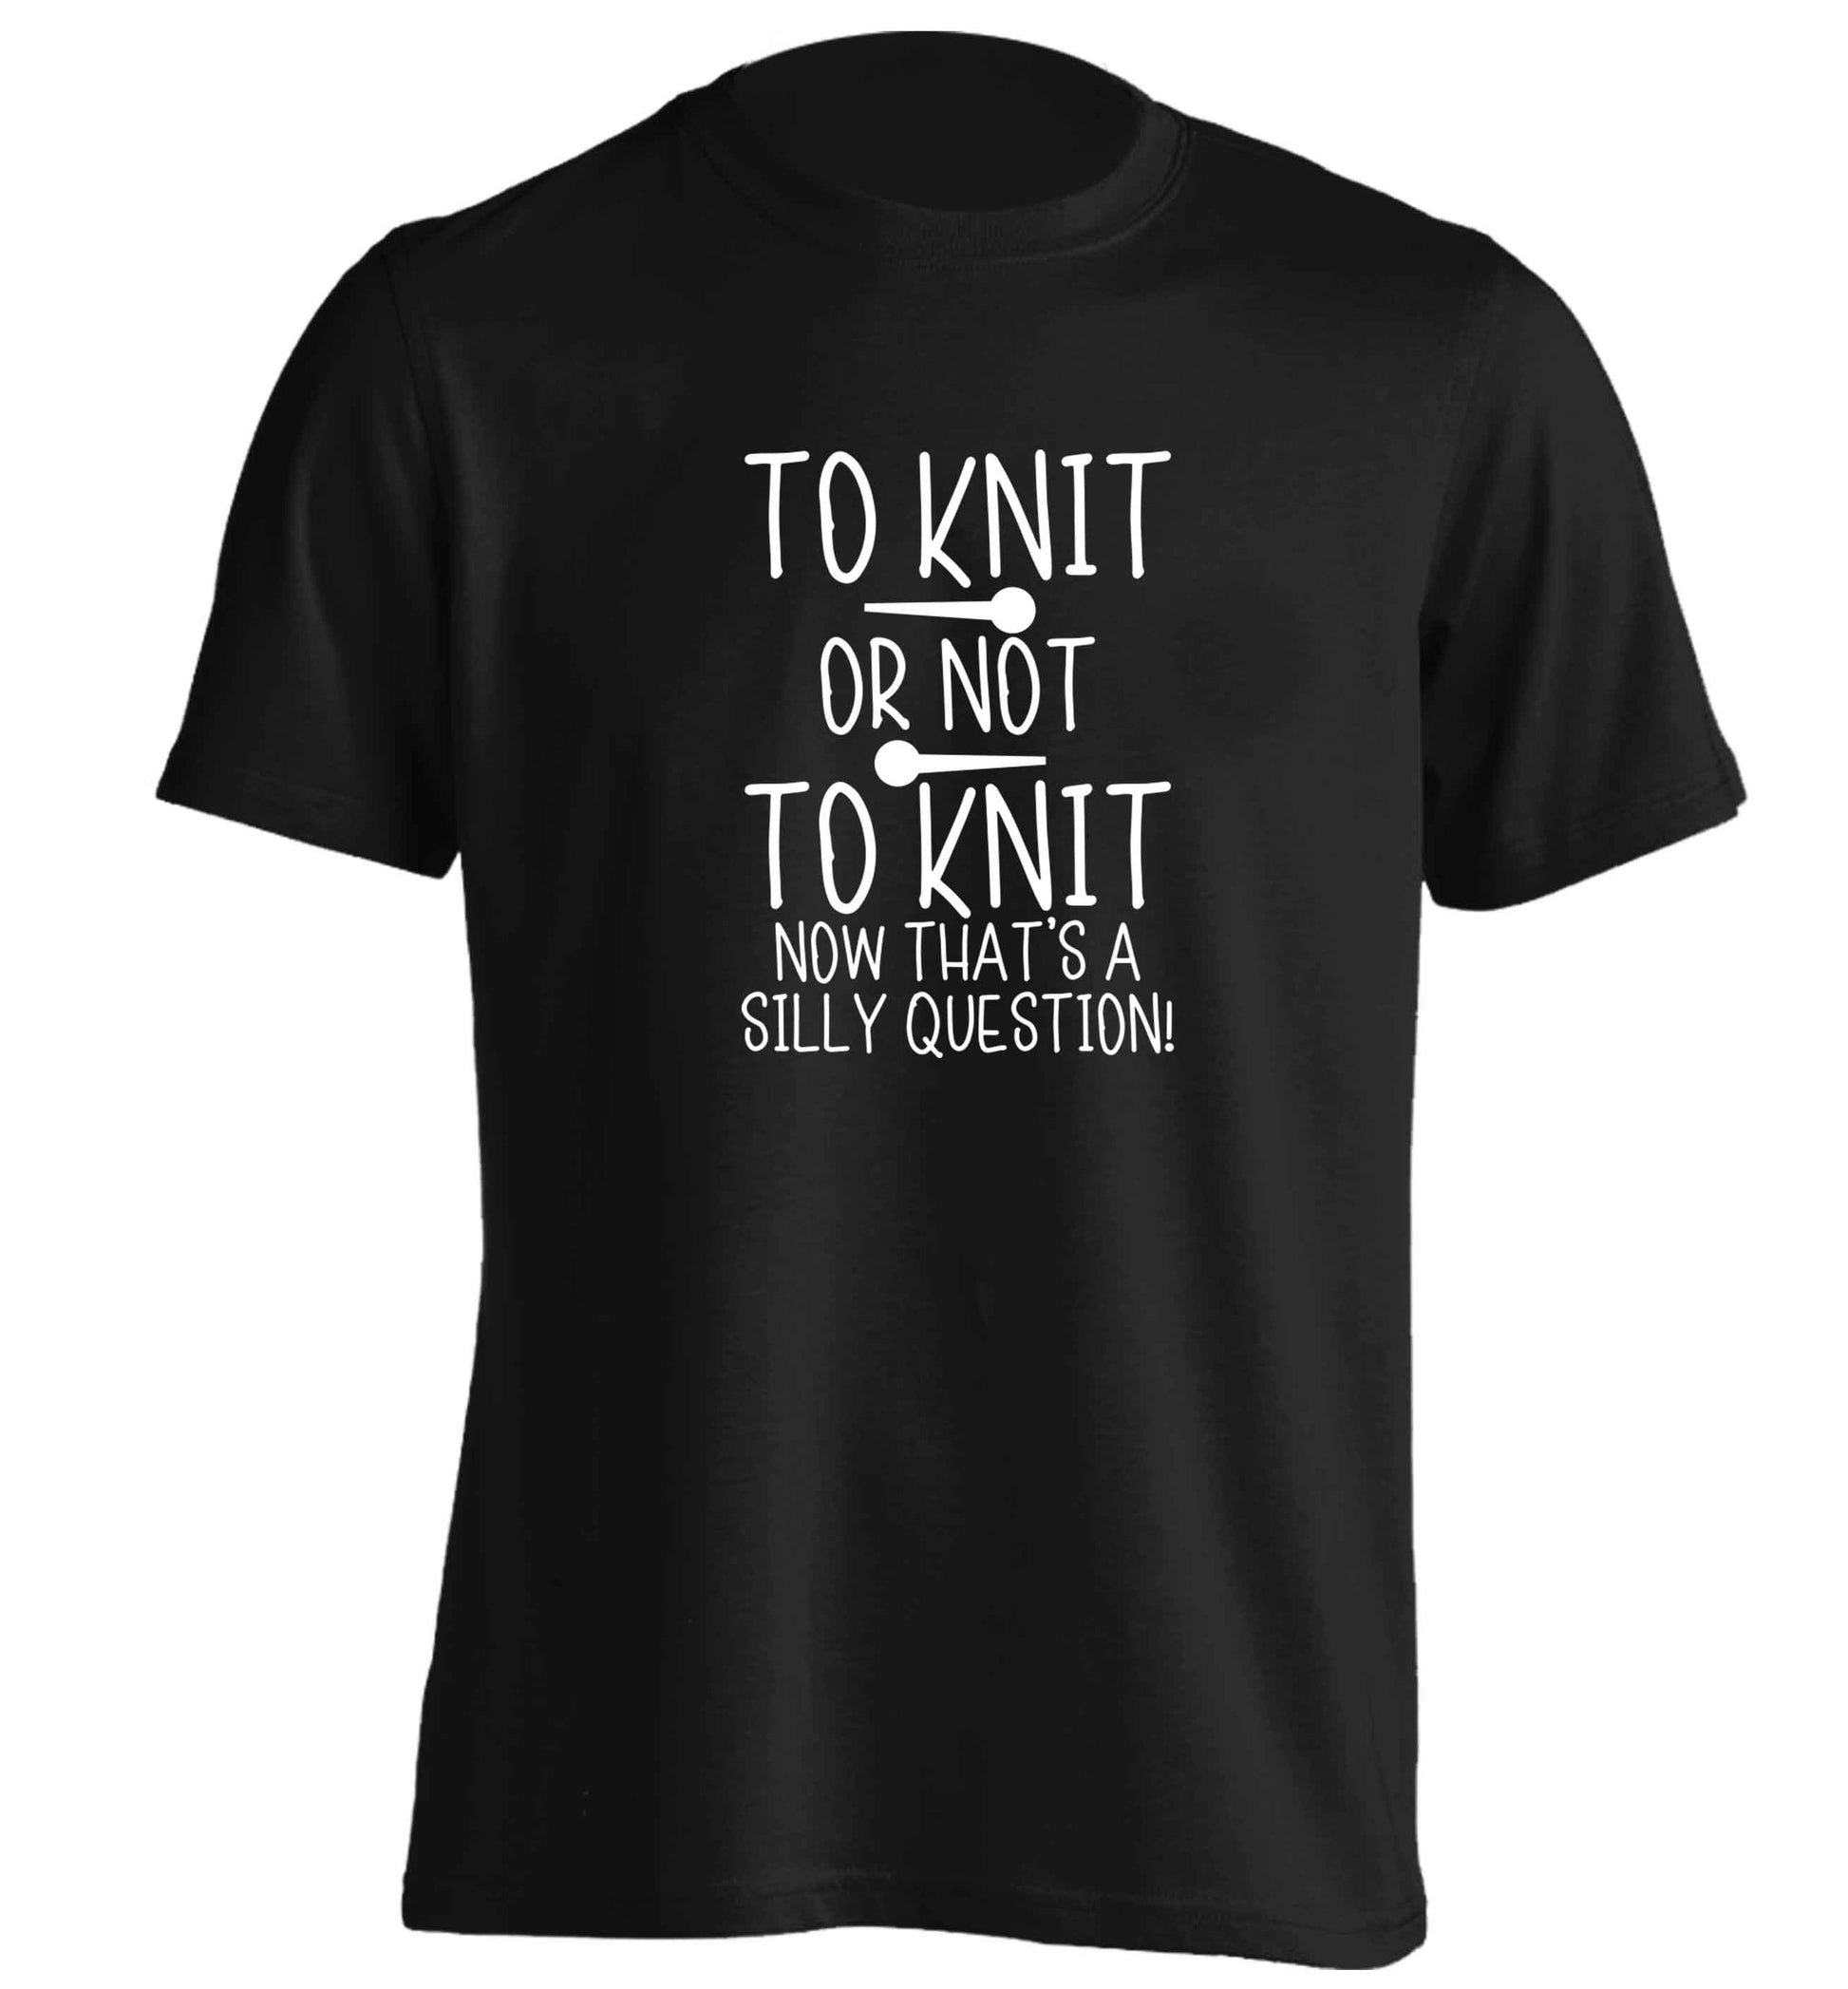 To knit or not to knit now that's a silly question adults unisex black Tshirt 2XL